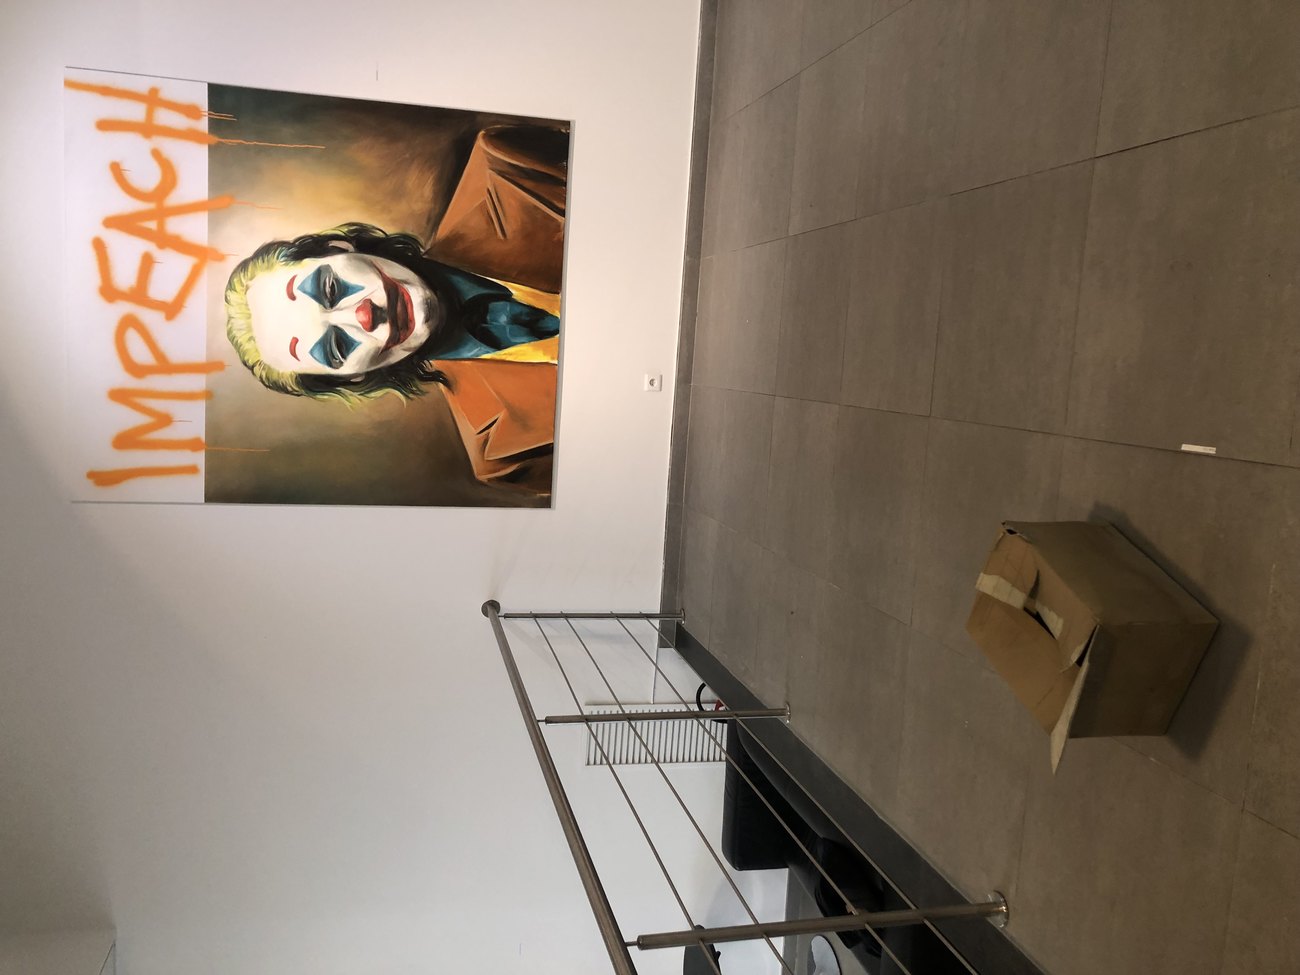 An image shows a painting of the joker with IMPEACH spraypainted on top, and a cardboard box made of bronze on the floor